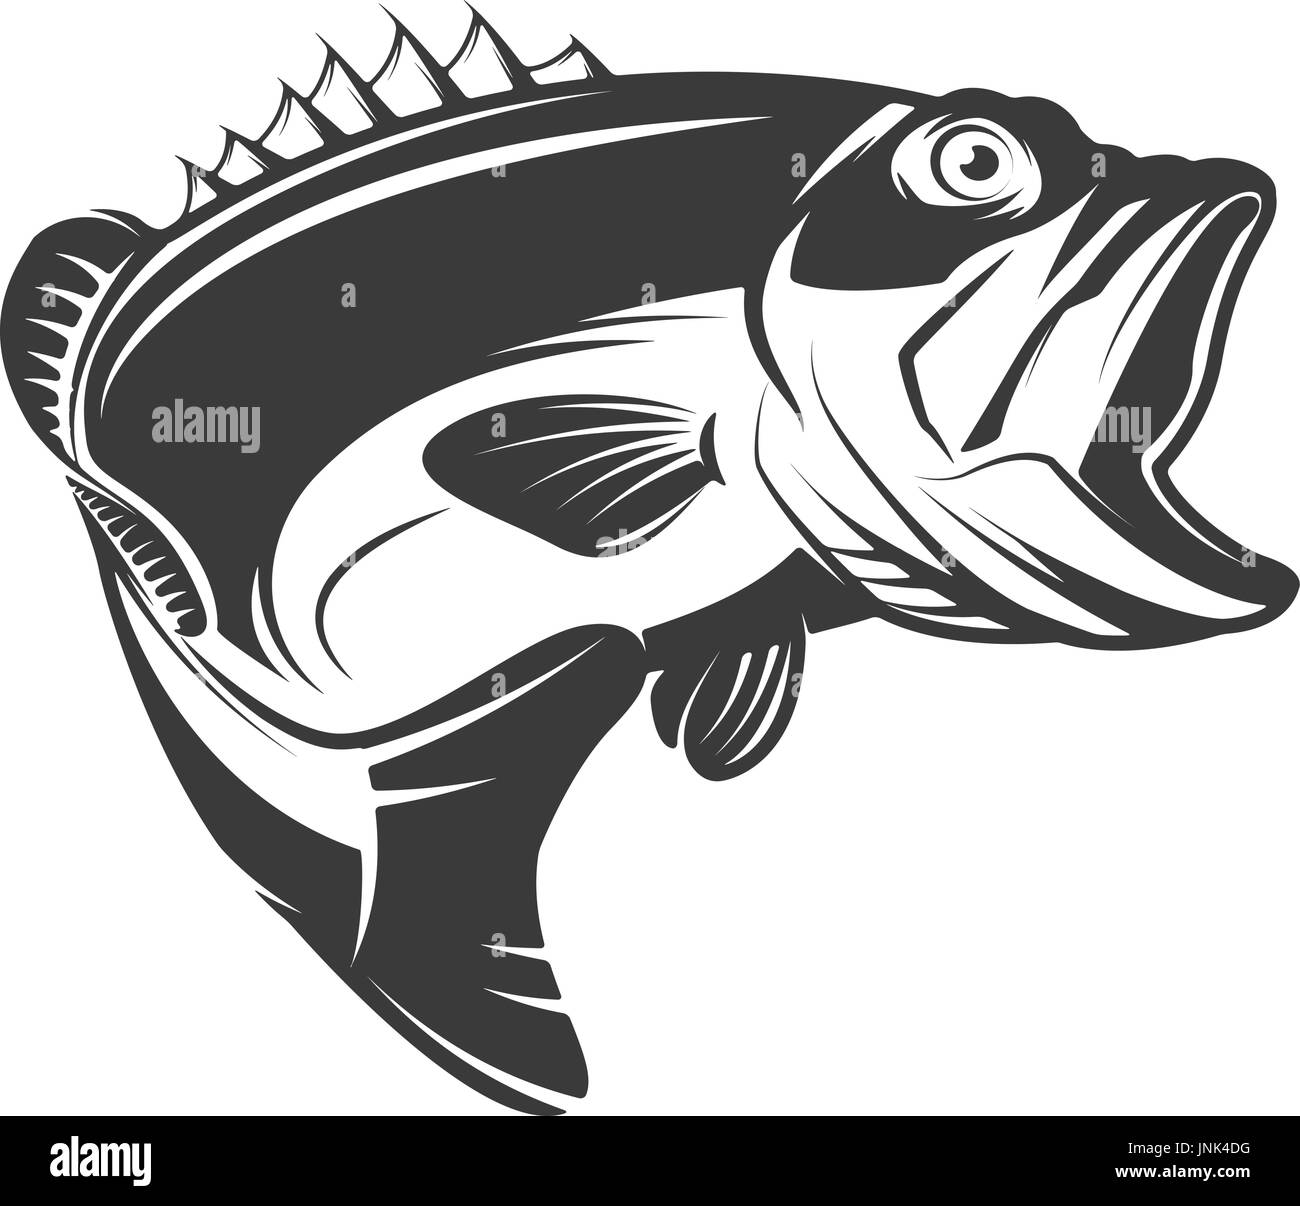 Bass fish icon isolated on white background. Design element for logo, emblem, sign, brand mark.  Vector illustration Stock Vector